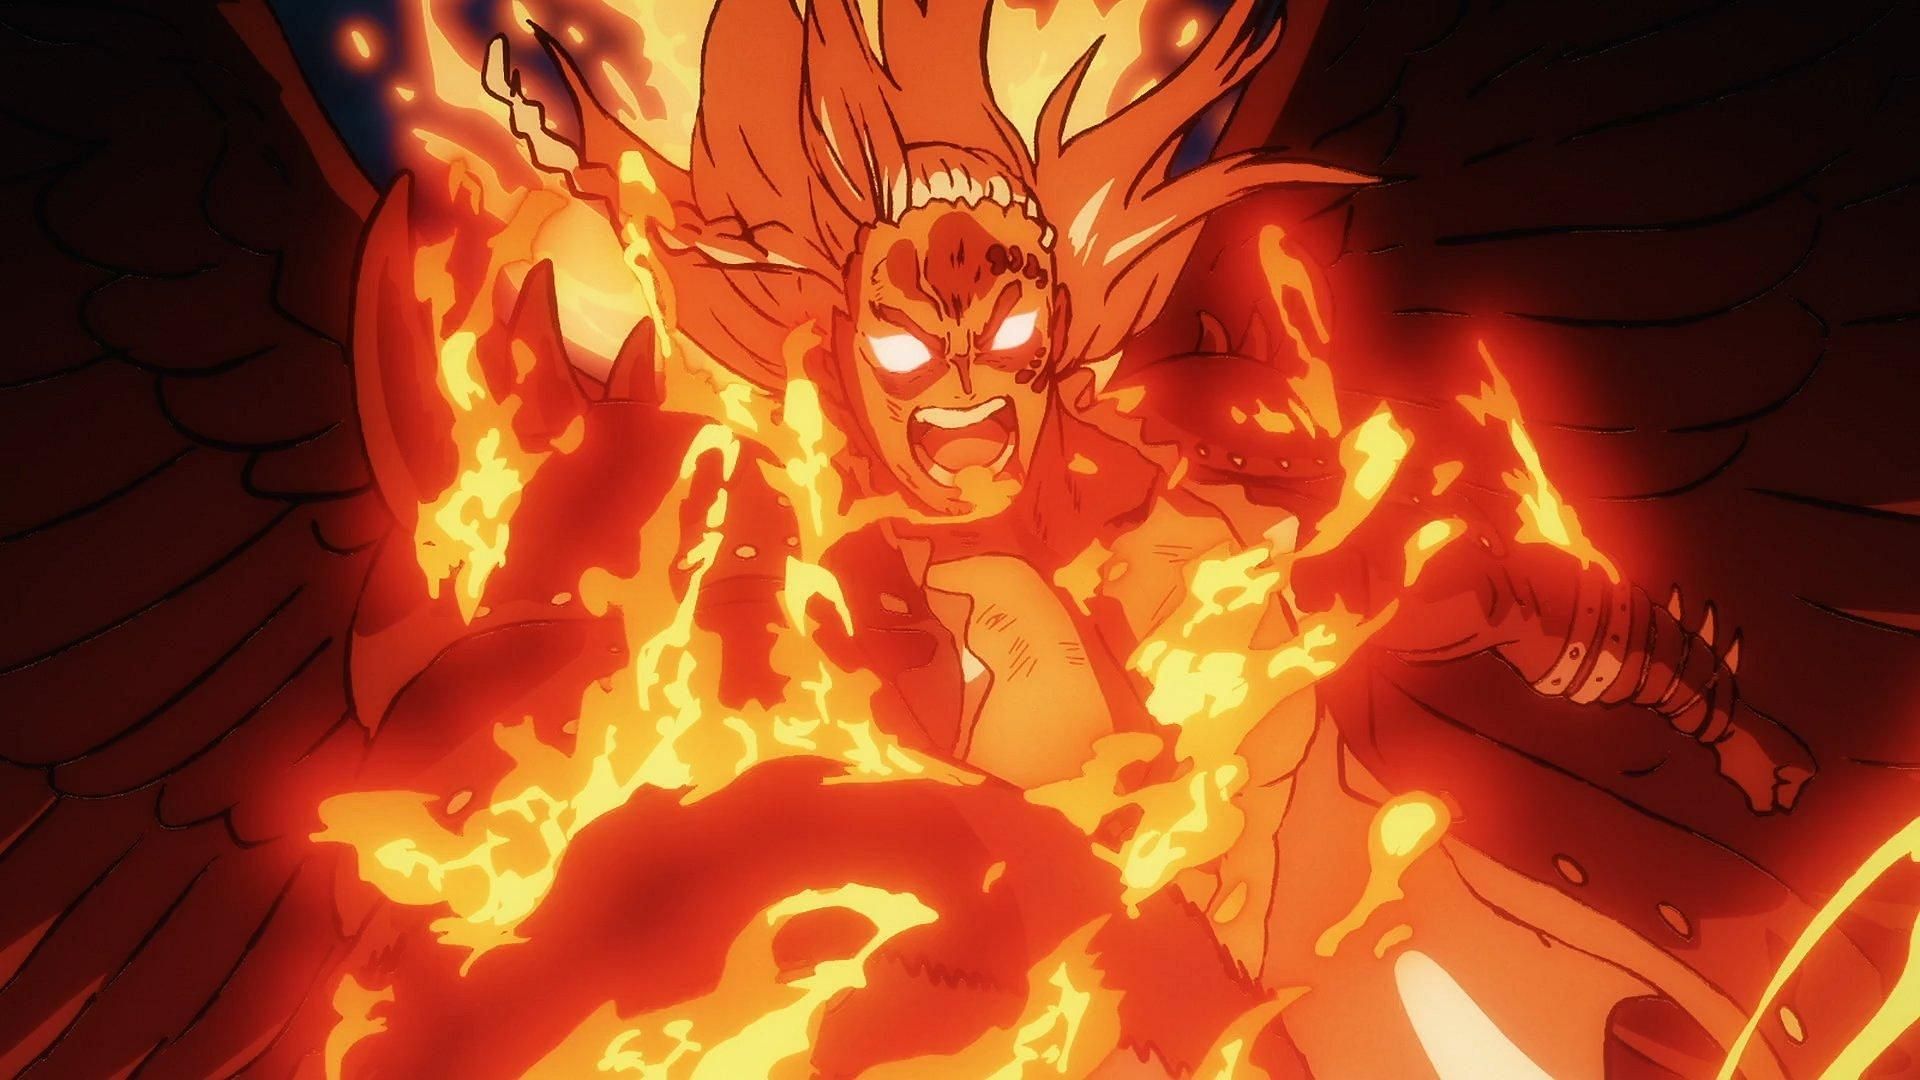 King as seen in One Piece (Image via Toei Animation)